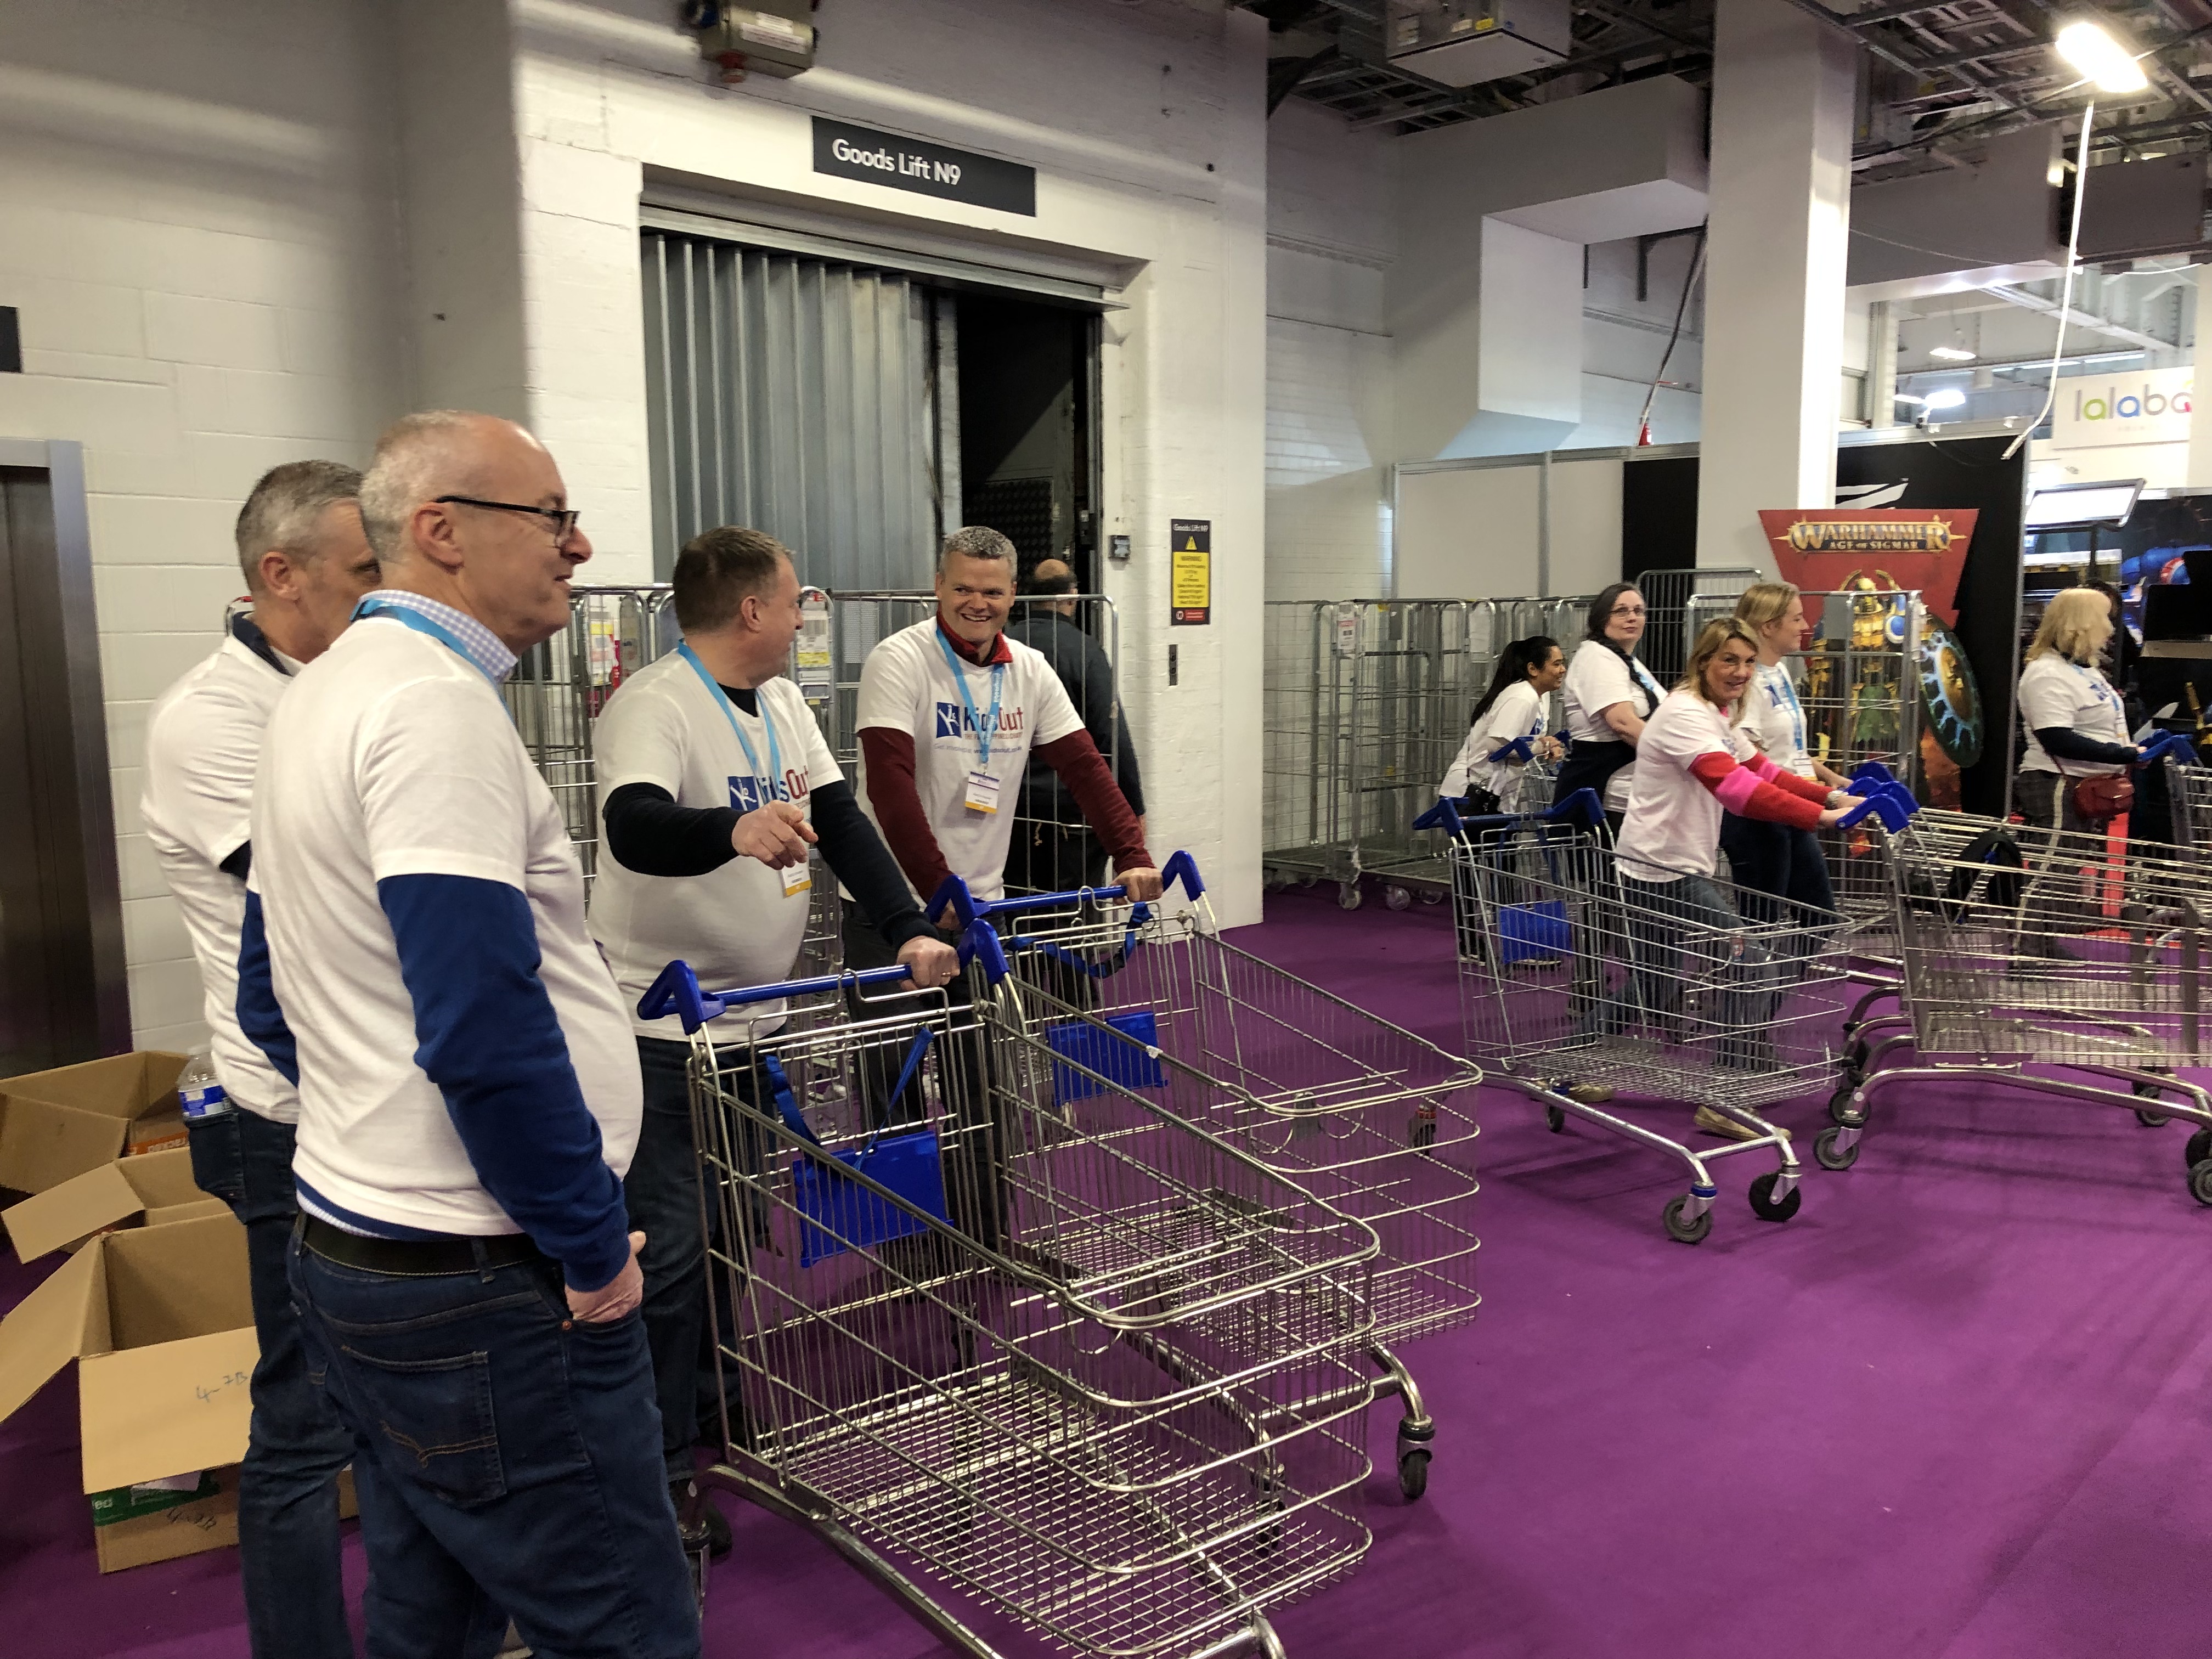 Men and women standing with shopping carts